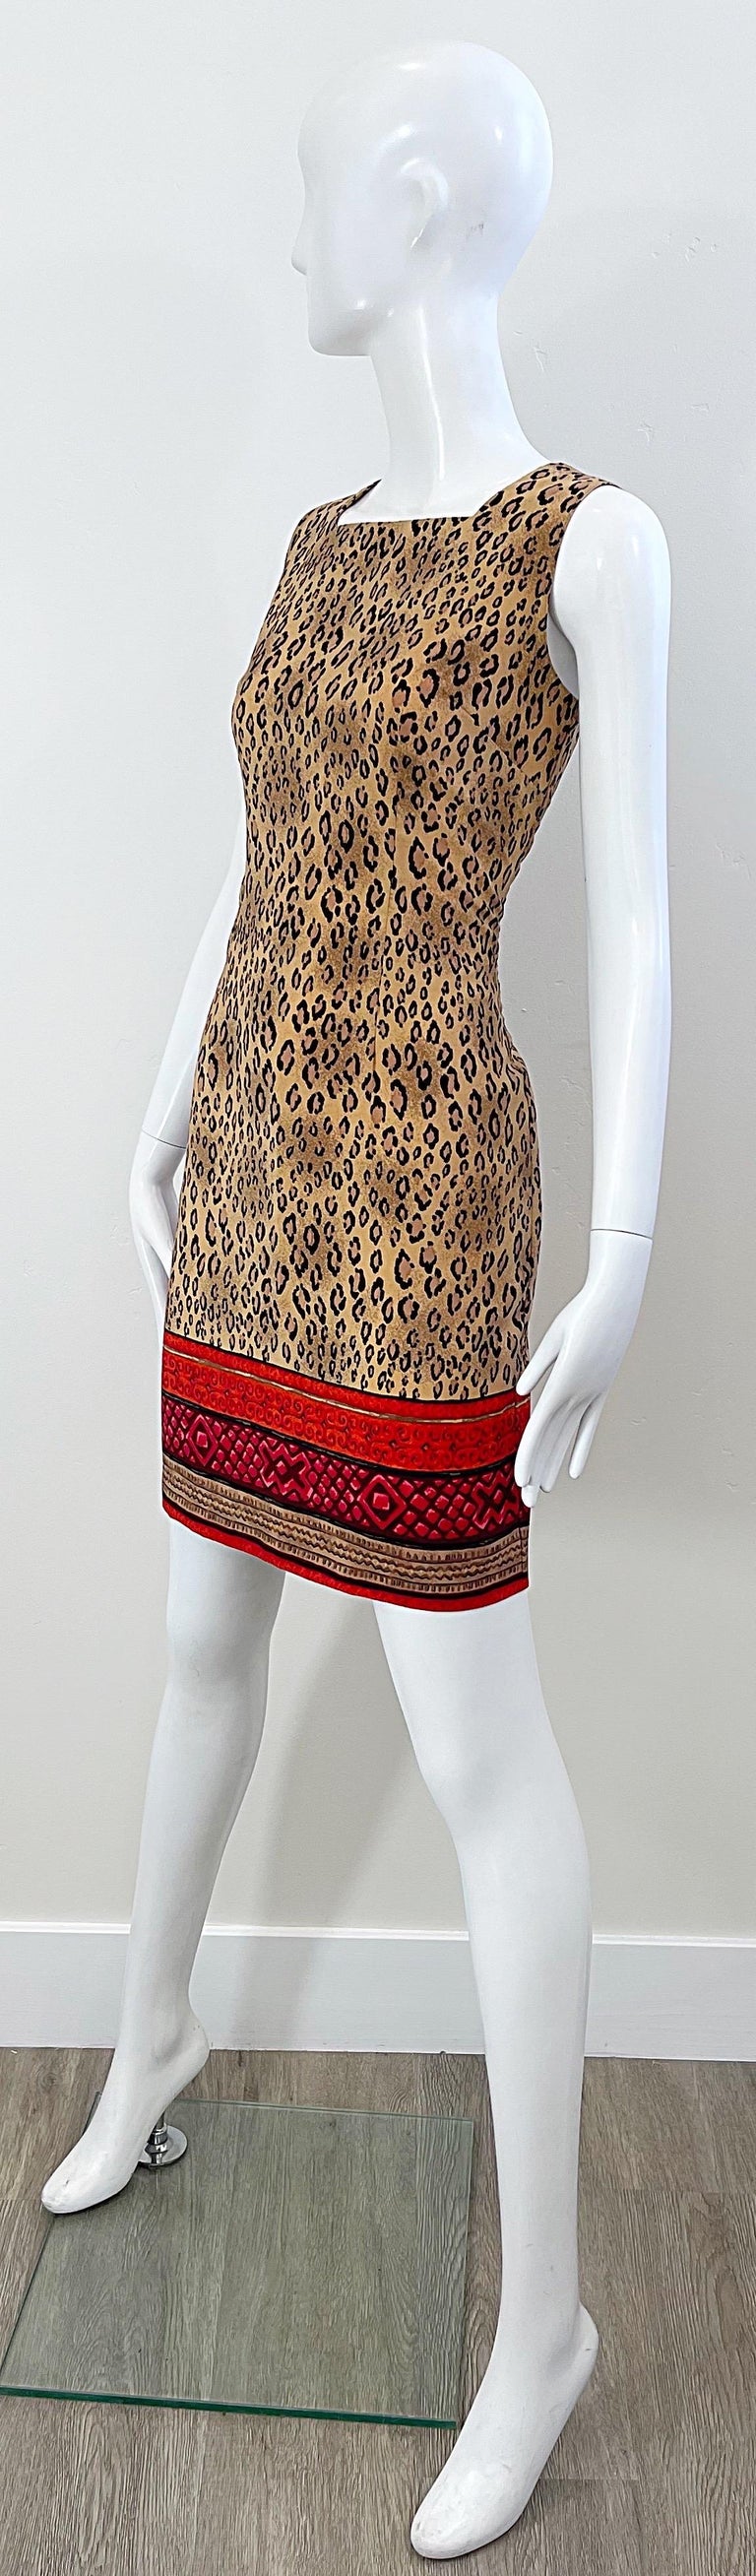 1990s Christian Lacroix Leopard Cheetah Animal Print Size 8 Vintage 90s Dress In Excellent Condition For Sale In San Diego, CA